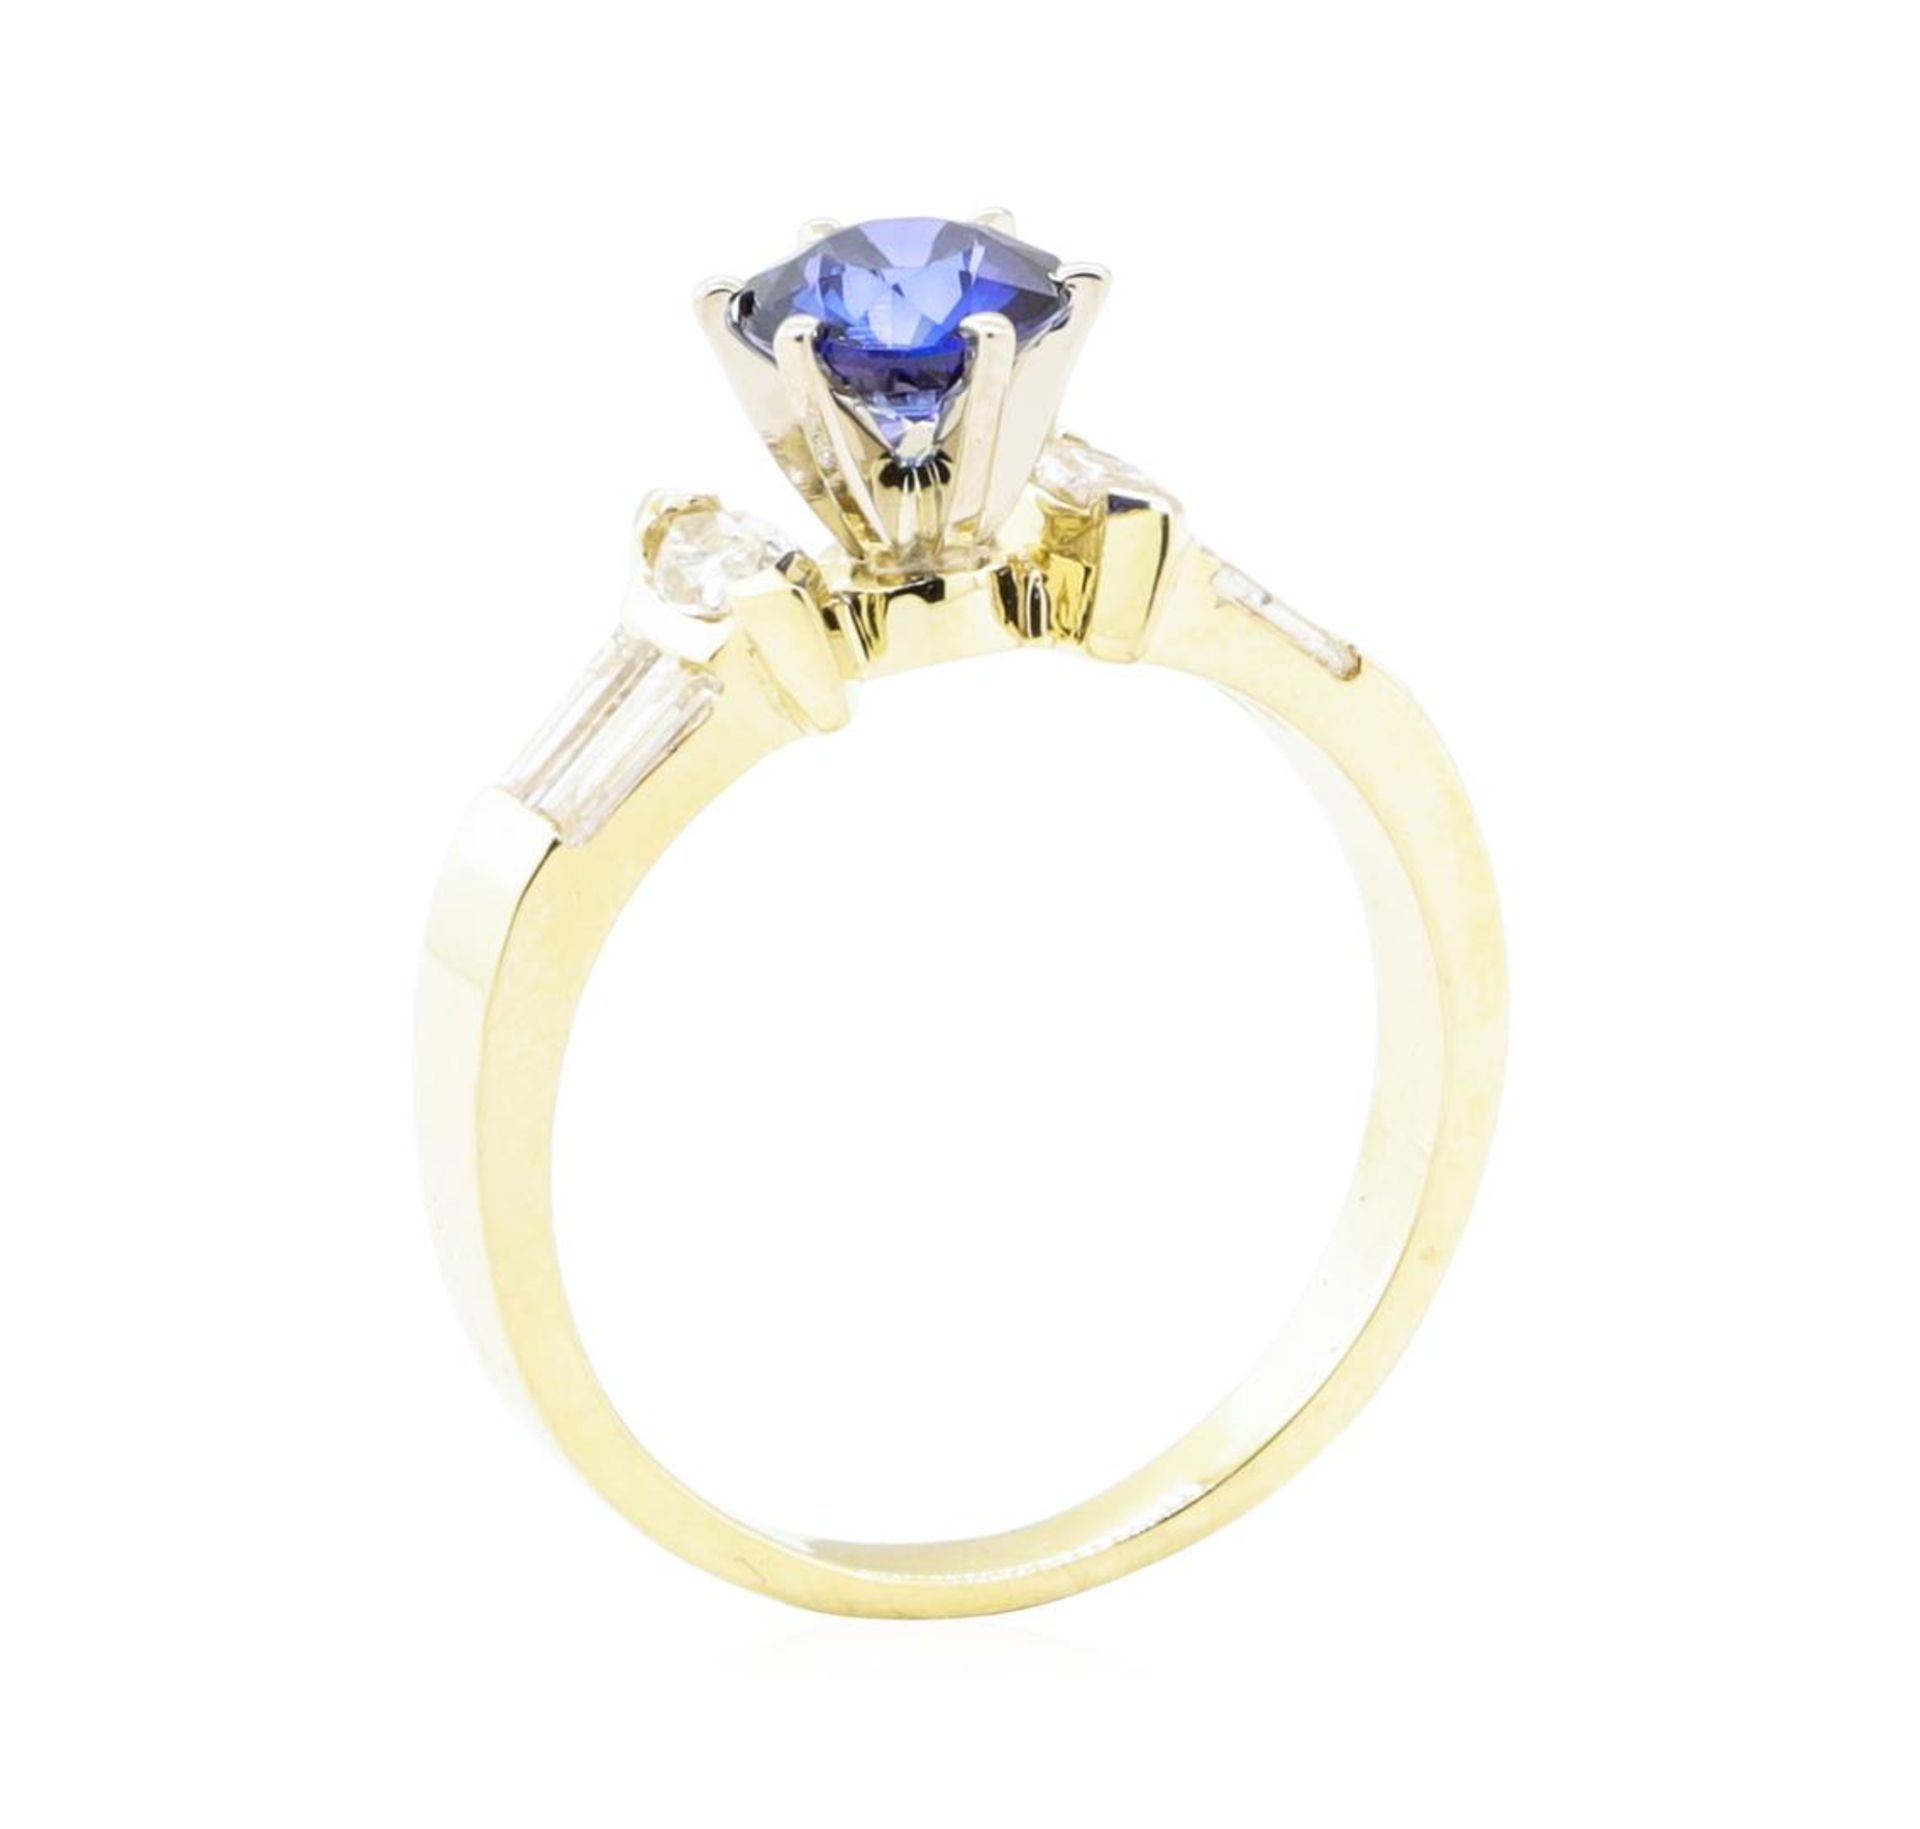 1.39 ctw Sapphire and Diamond Ring - 14KT Yellow Gold - Image 4 of 4